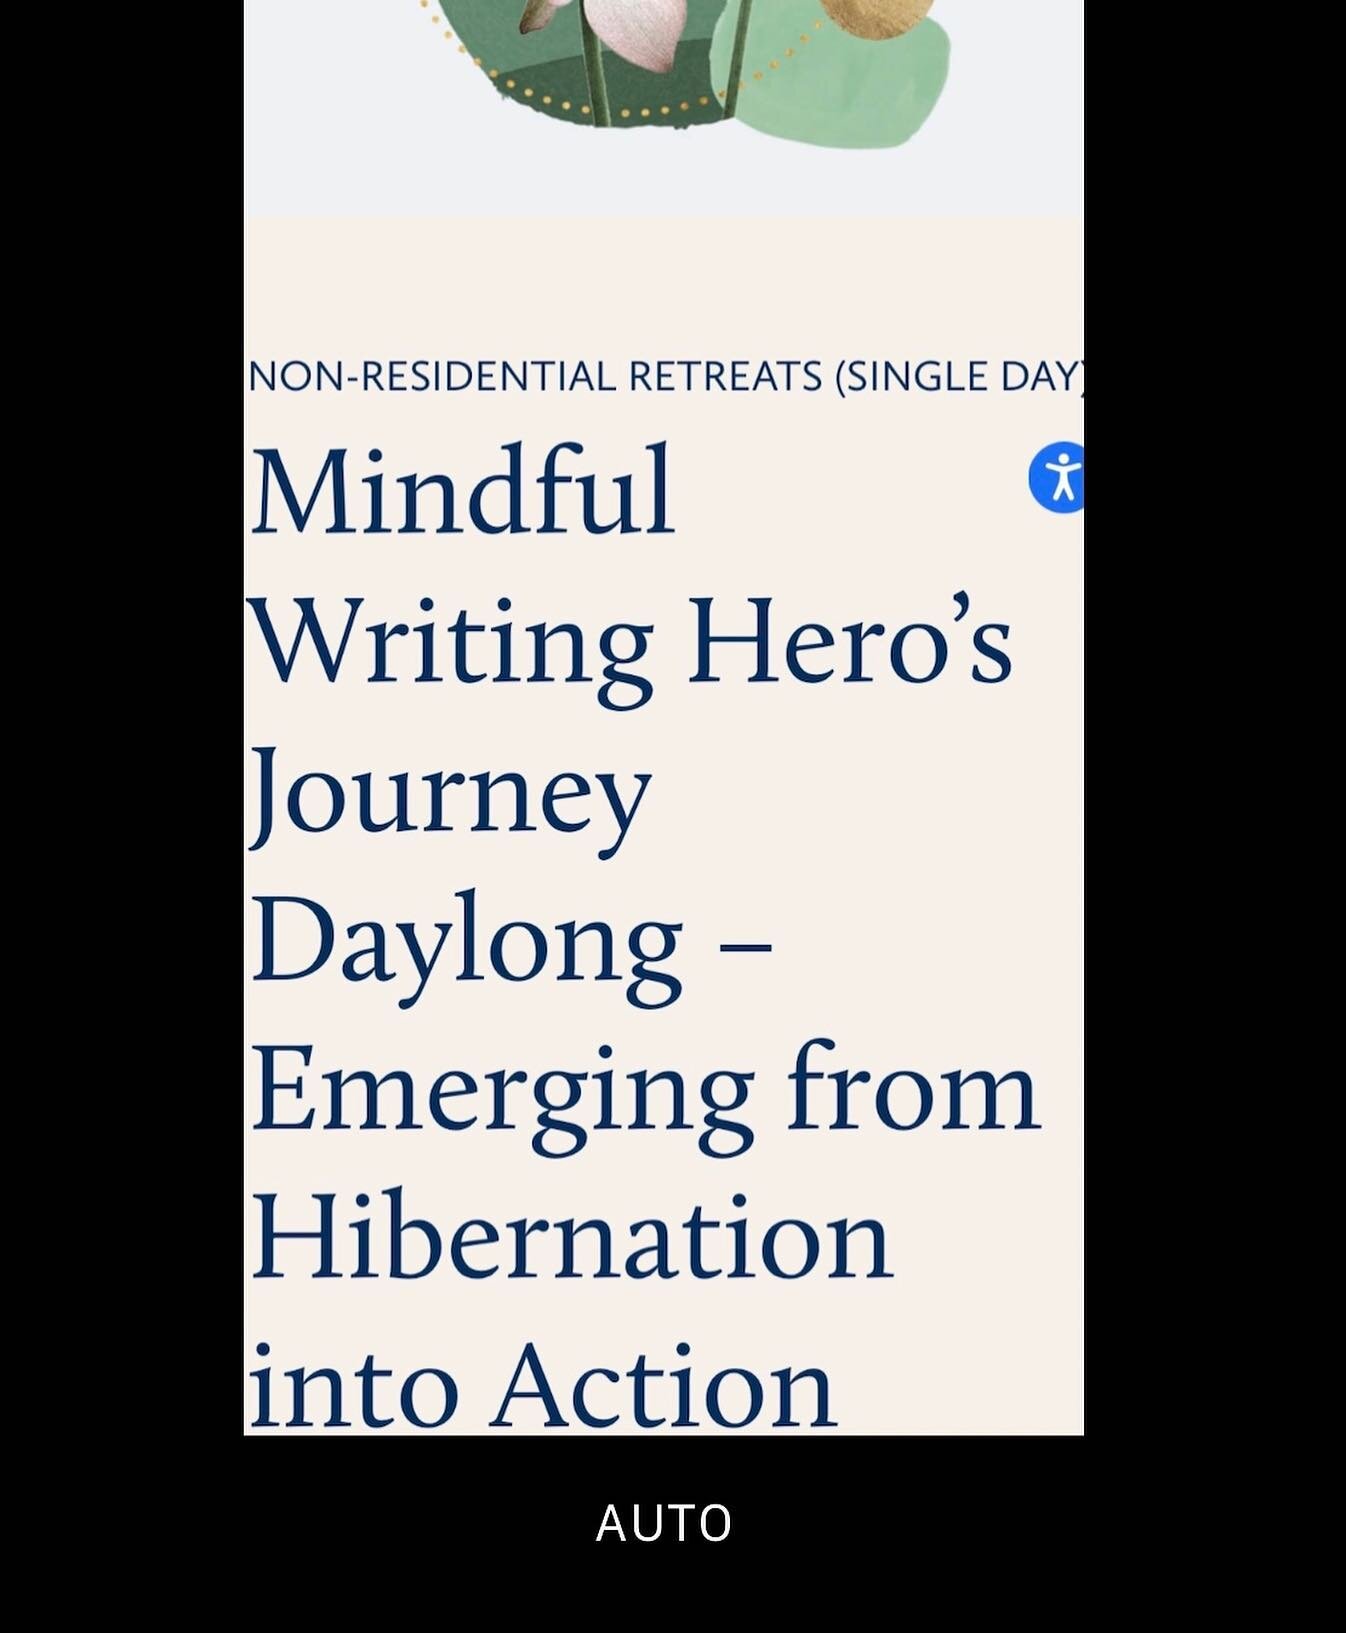 Excited to be teaching a &ldquo;Mindful Writing Hero&rsquo;s Journey Daylong - Emerging from Hibernation into Action&rdquo; on Saturday, Feb. 20, from 10 am - 3 pm PT. Here&rsquo;s the link for more information: https://insightla.org/event/heros/ #Mi